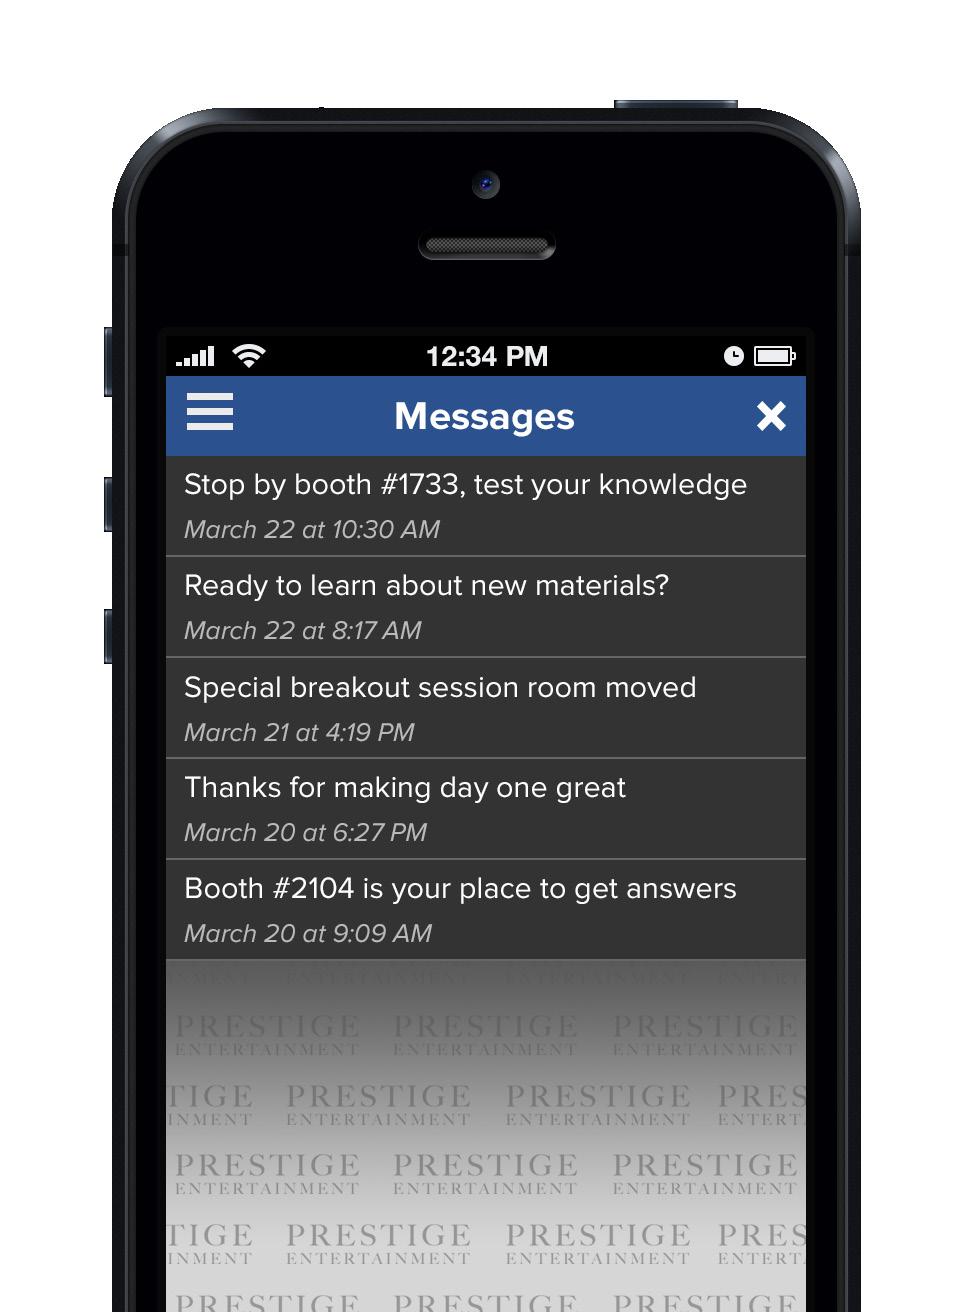 Feature a product on one of the banners or push a notification out to thousands of attendees.